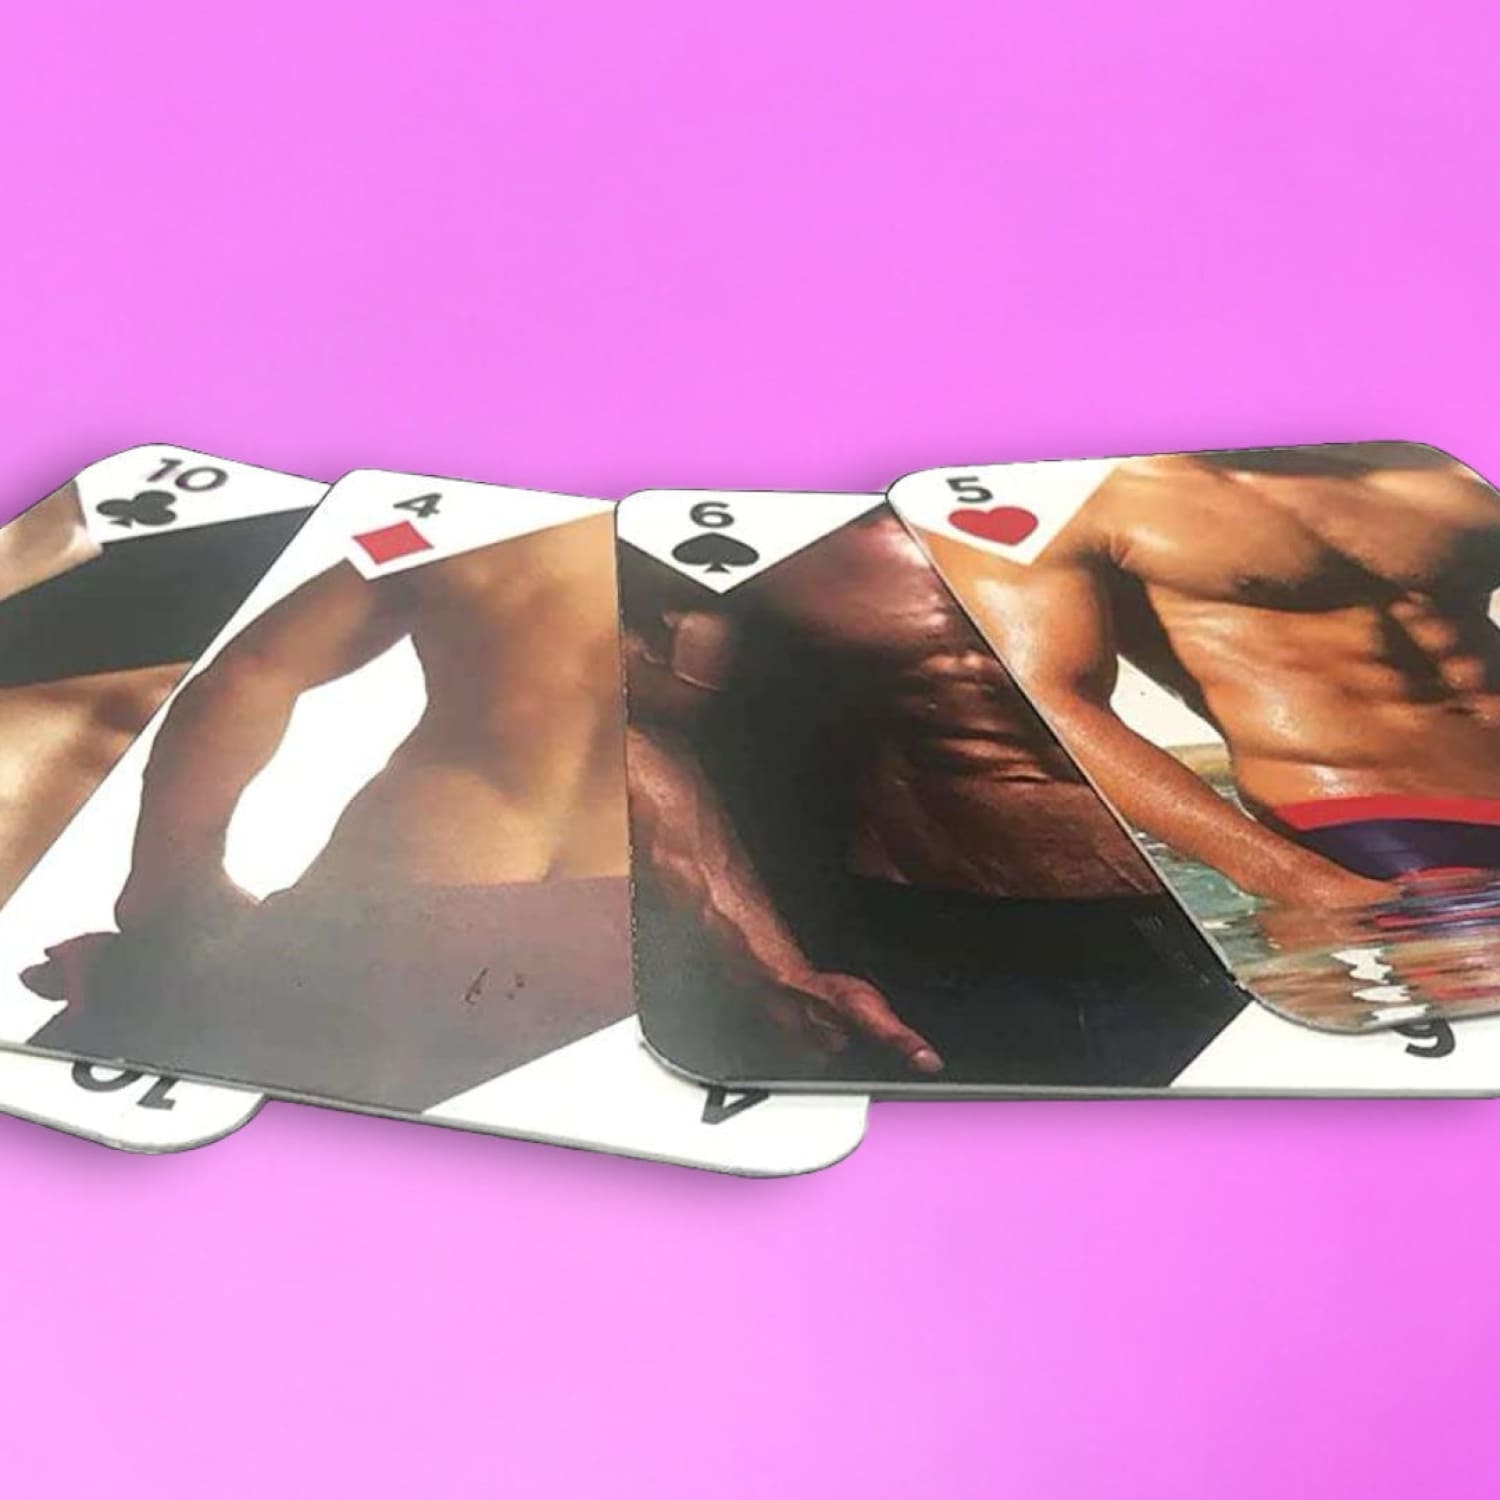 Sexy Guys Playing Cards Bachelorette Gifts - Gag Gift